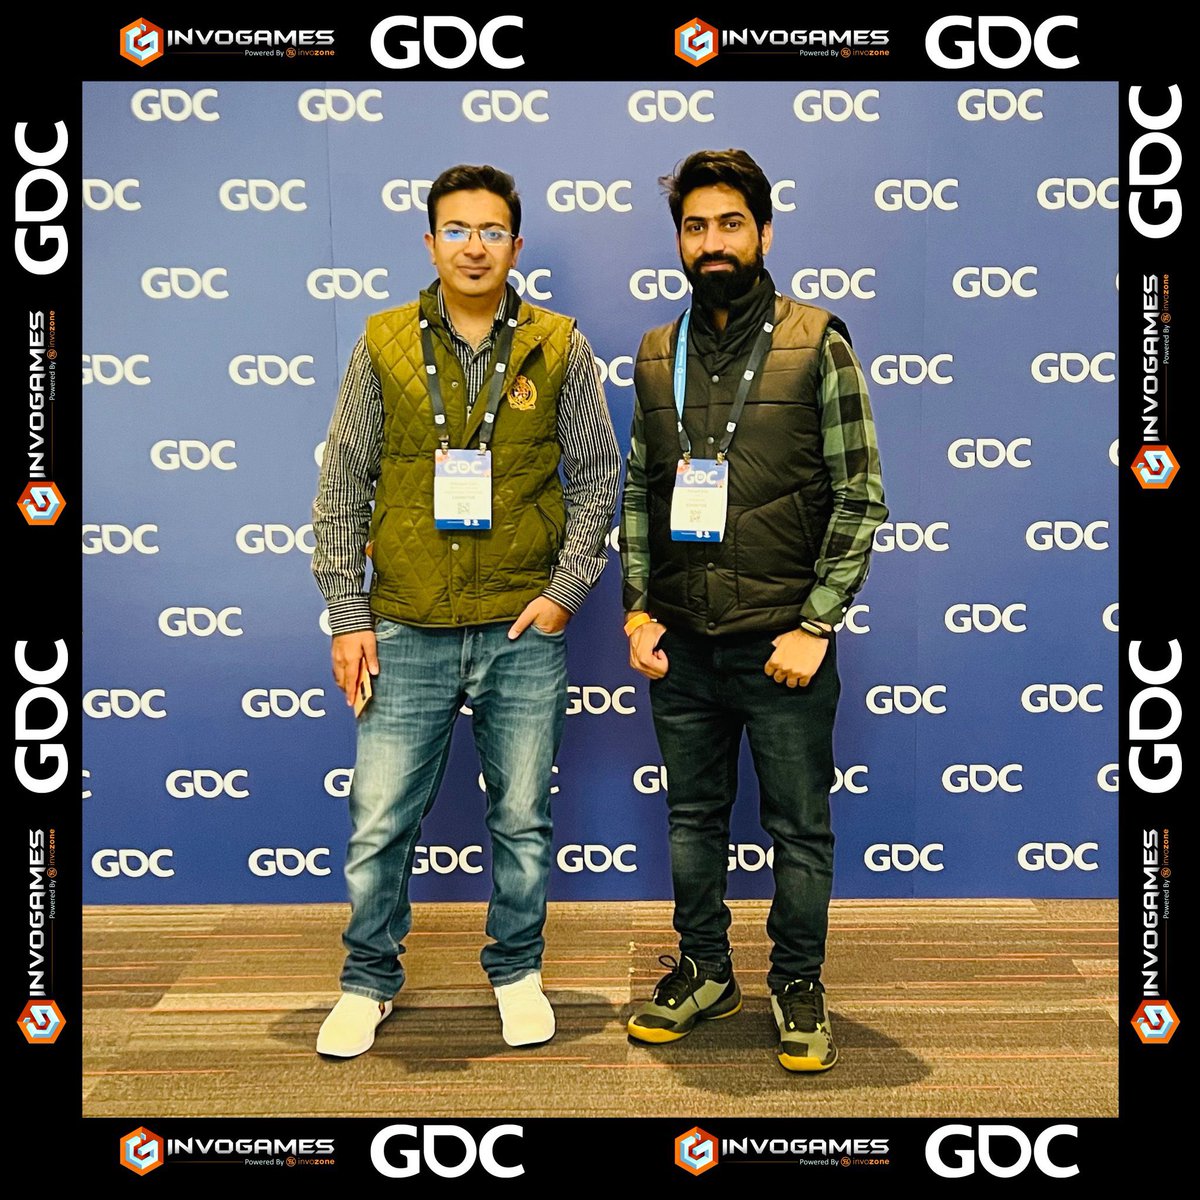 @Official_GDC That guy Furqan Aziz from #invozone  & #invogames stole a web 3 community project #cardano4speed 
It’s sad to sit and watch how with his face still showing up at game conference